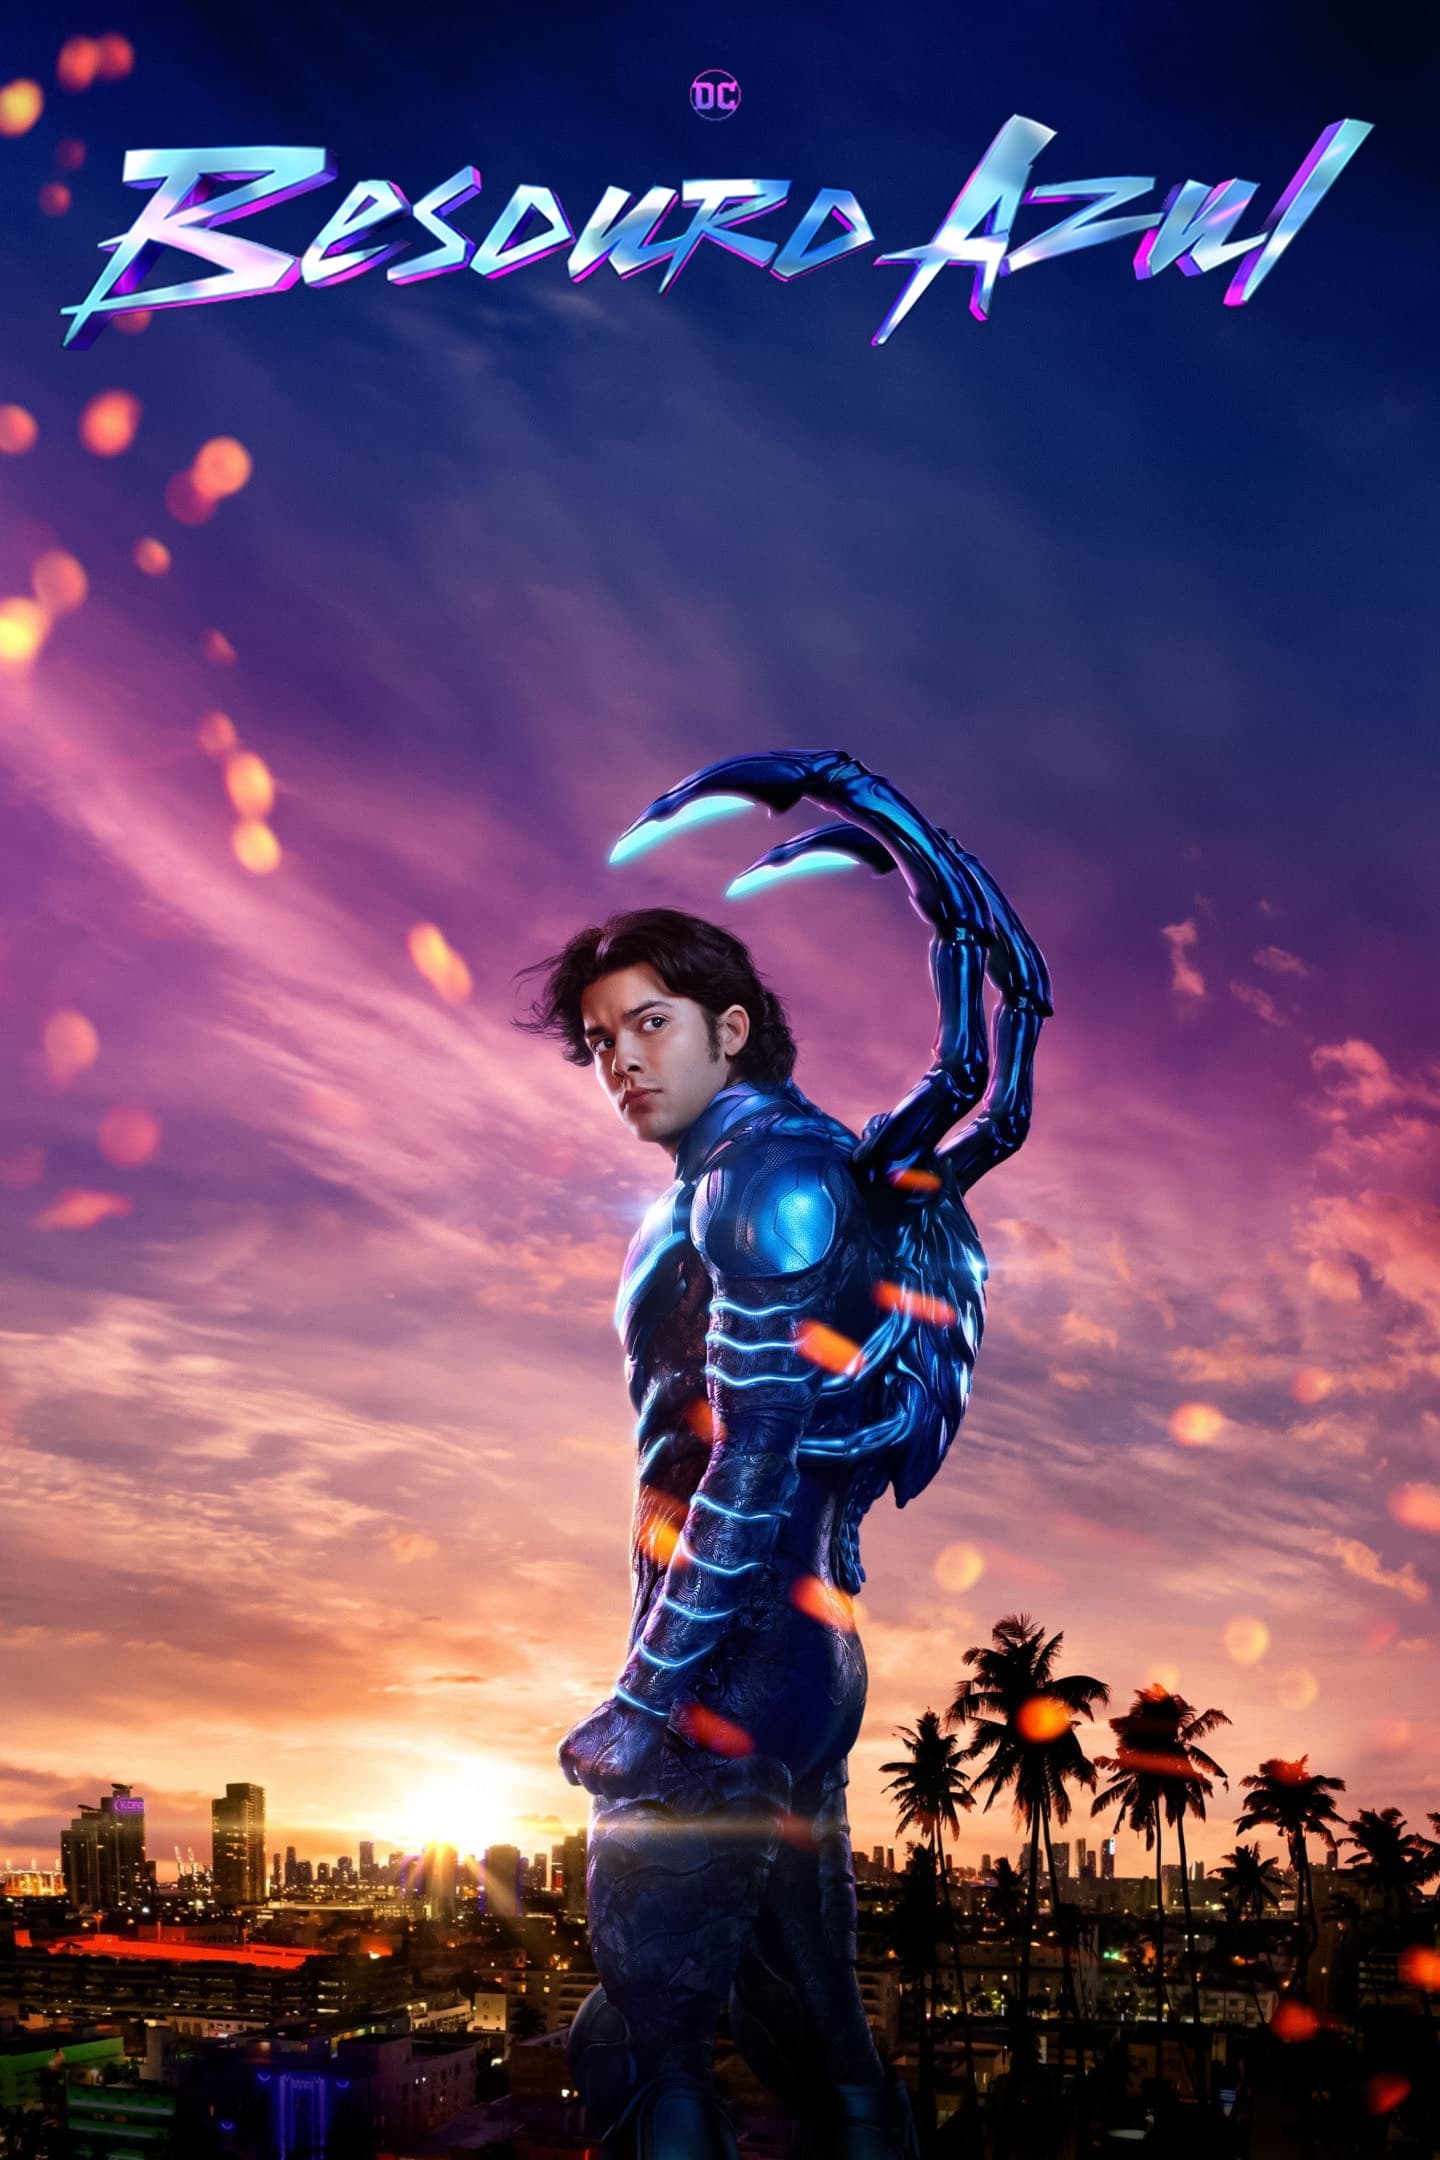 Poster and image movie Blue Beetle